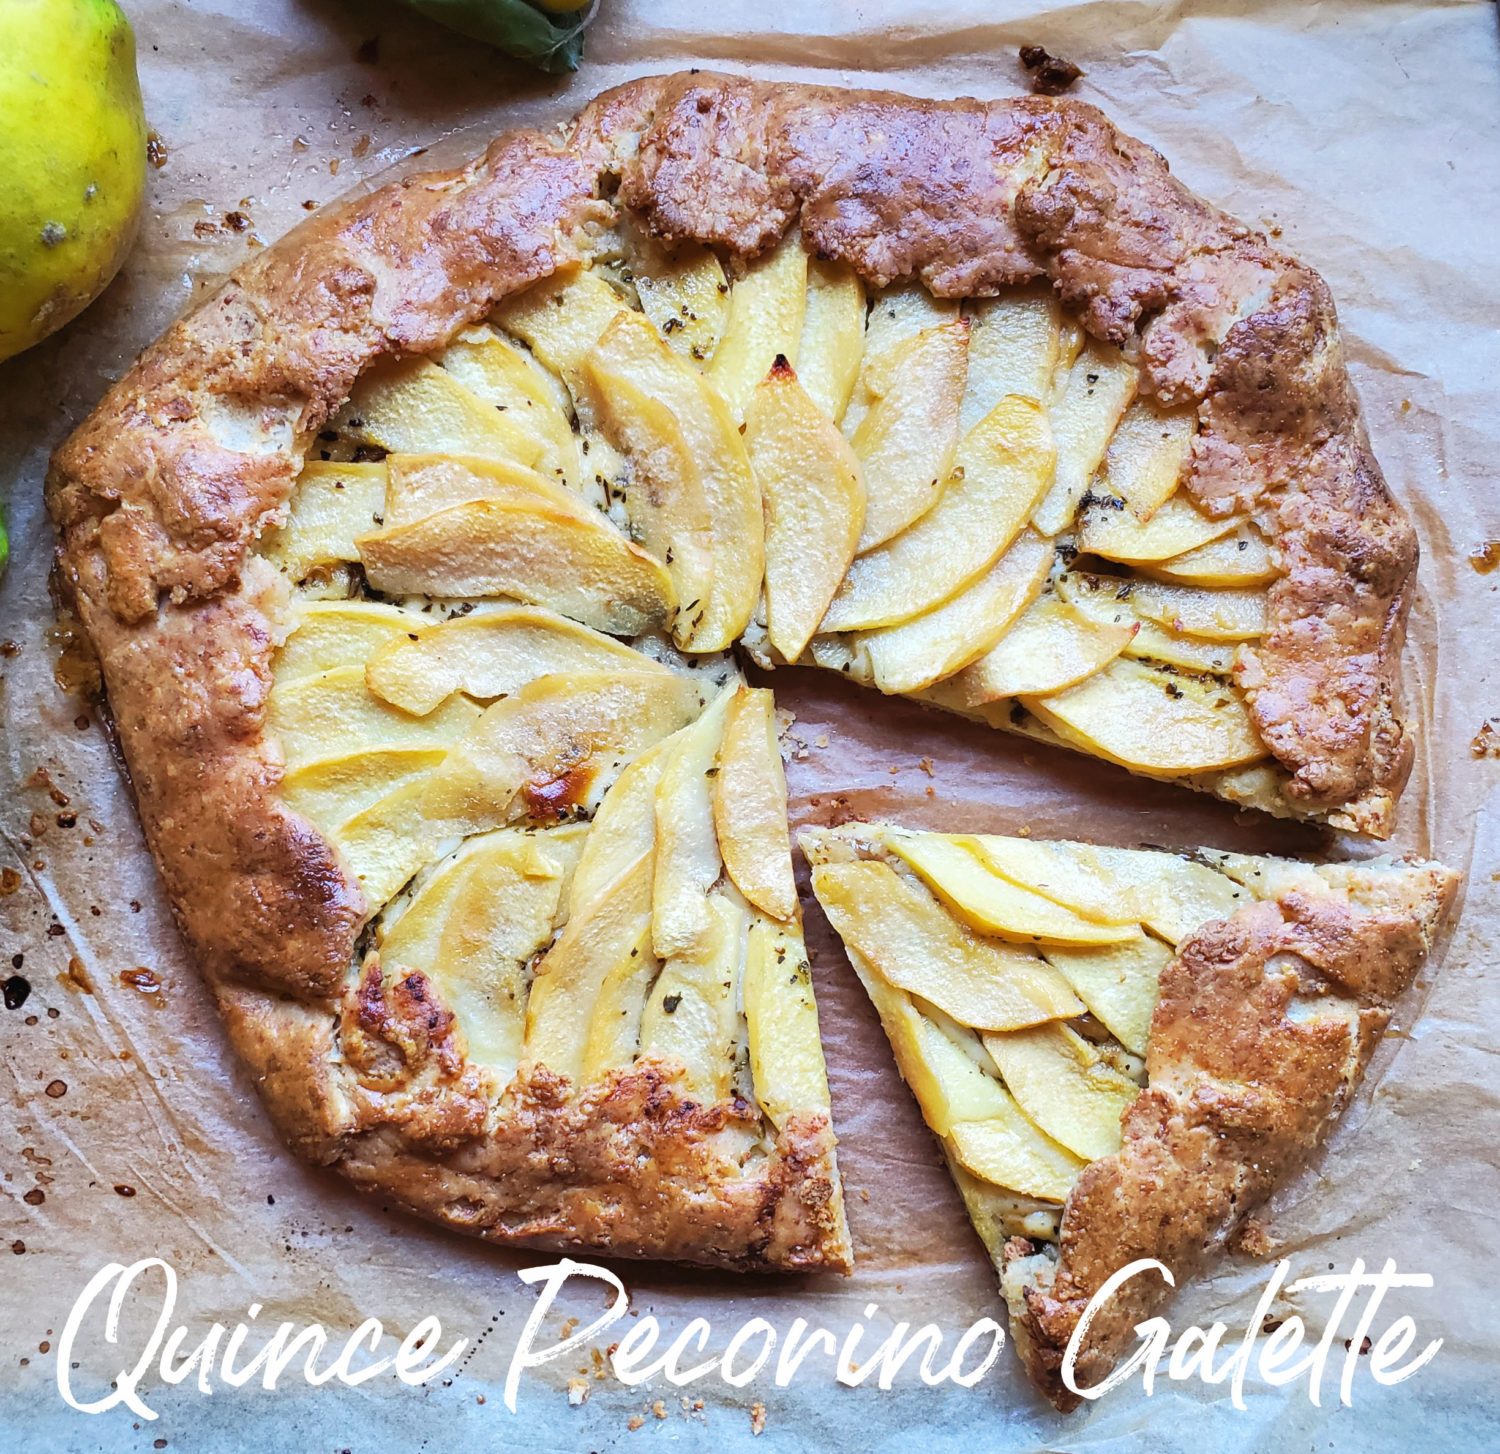 Quince Pecorino & Parmesan Galette; perfect balance of savory and hint of sweetness with caramelized onions for the most perfect brunch pie.